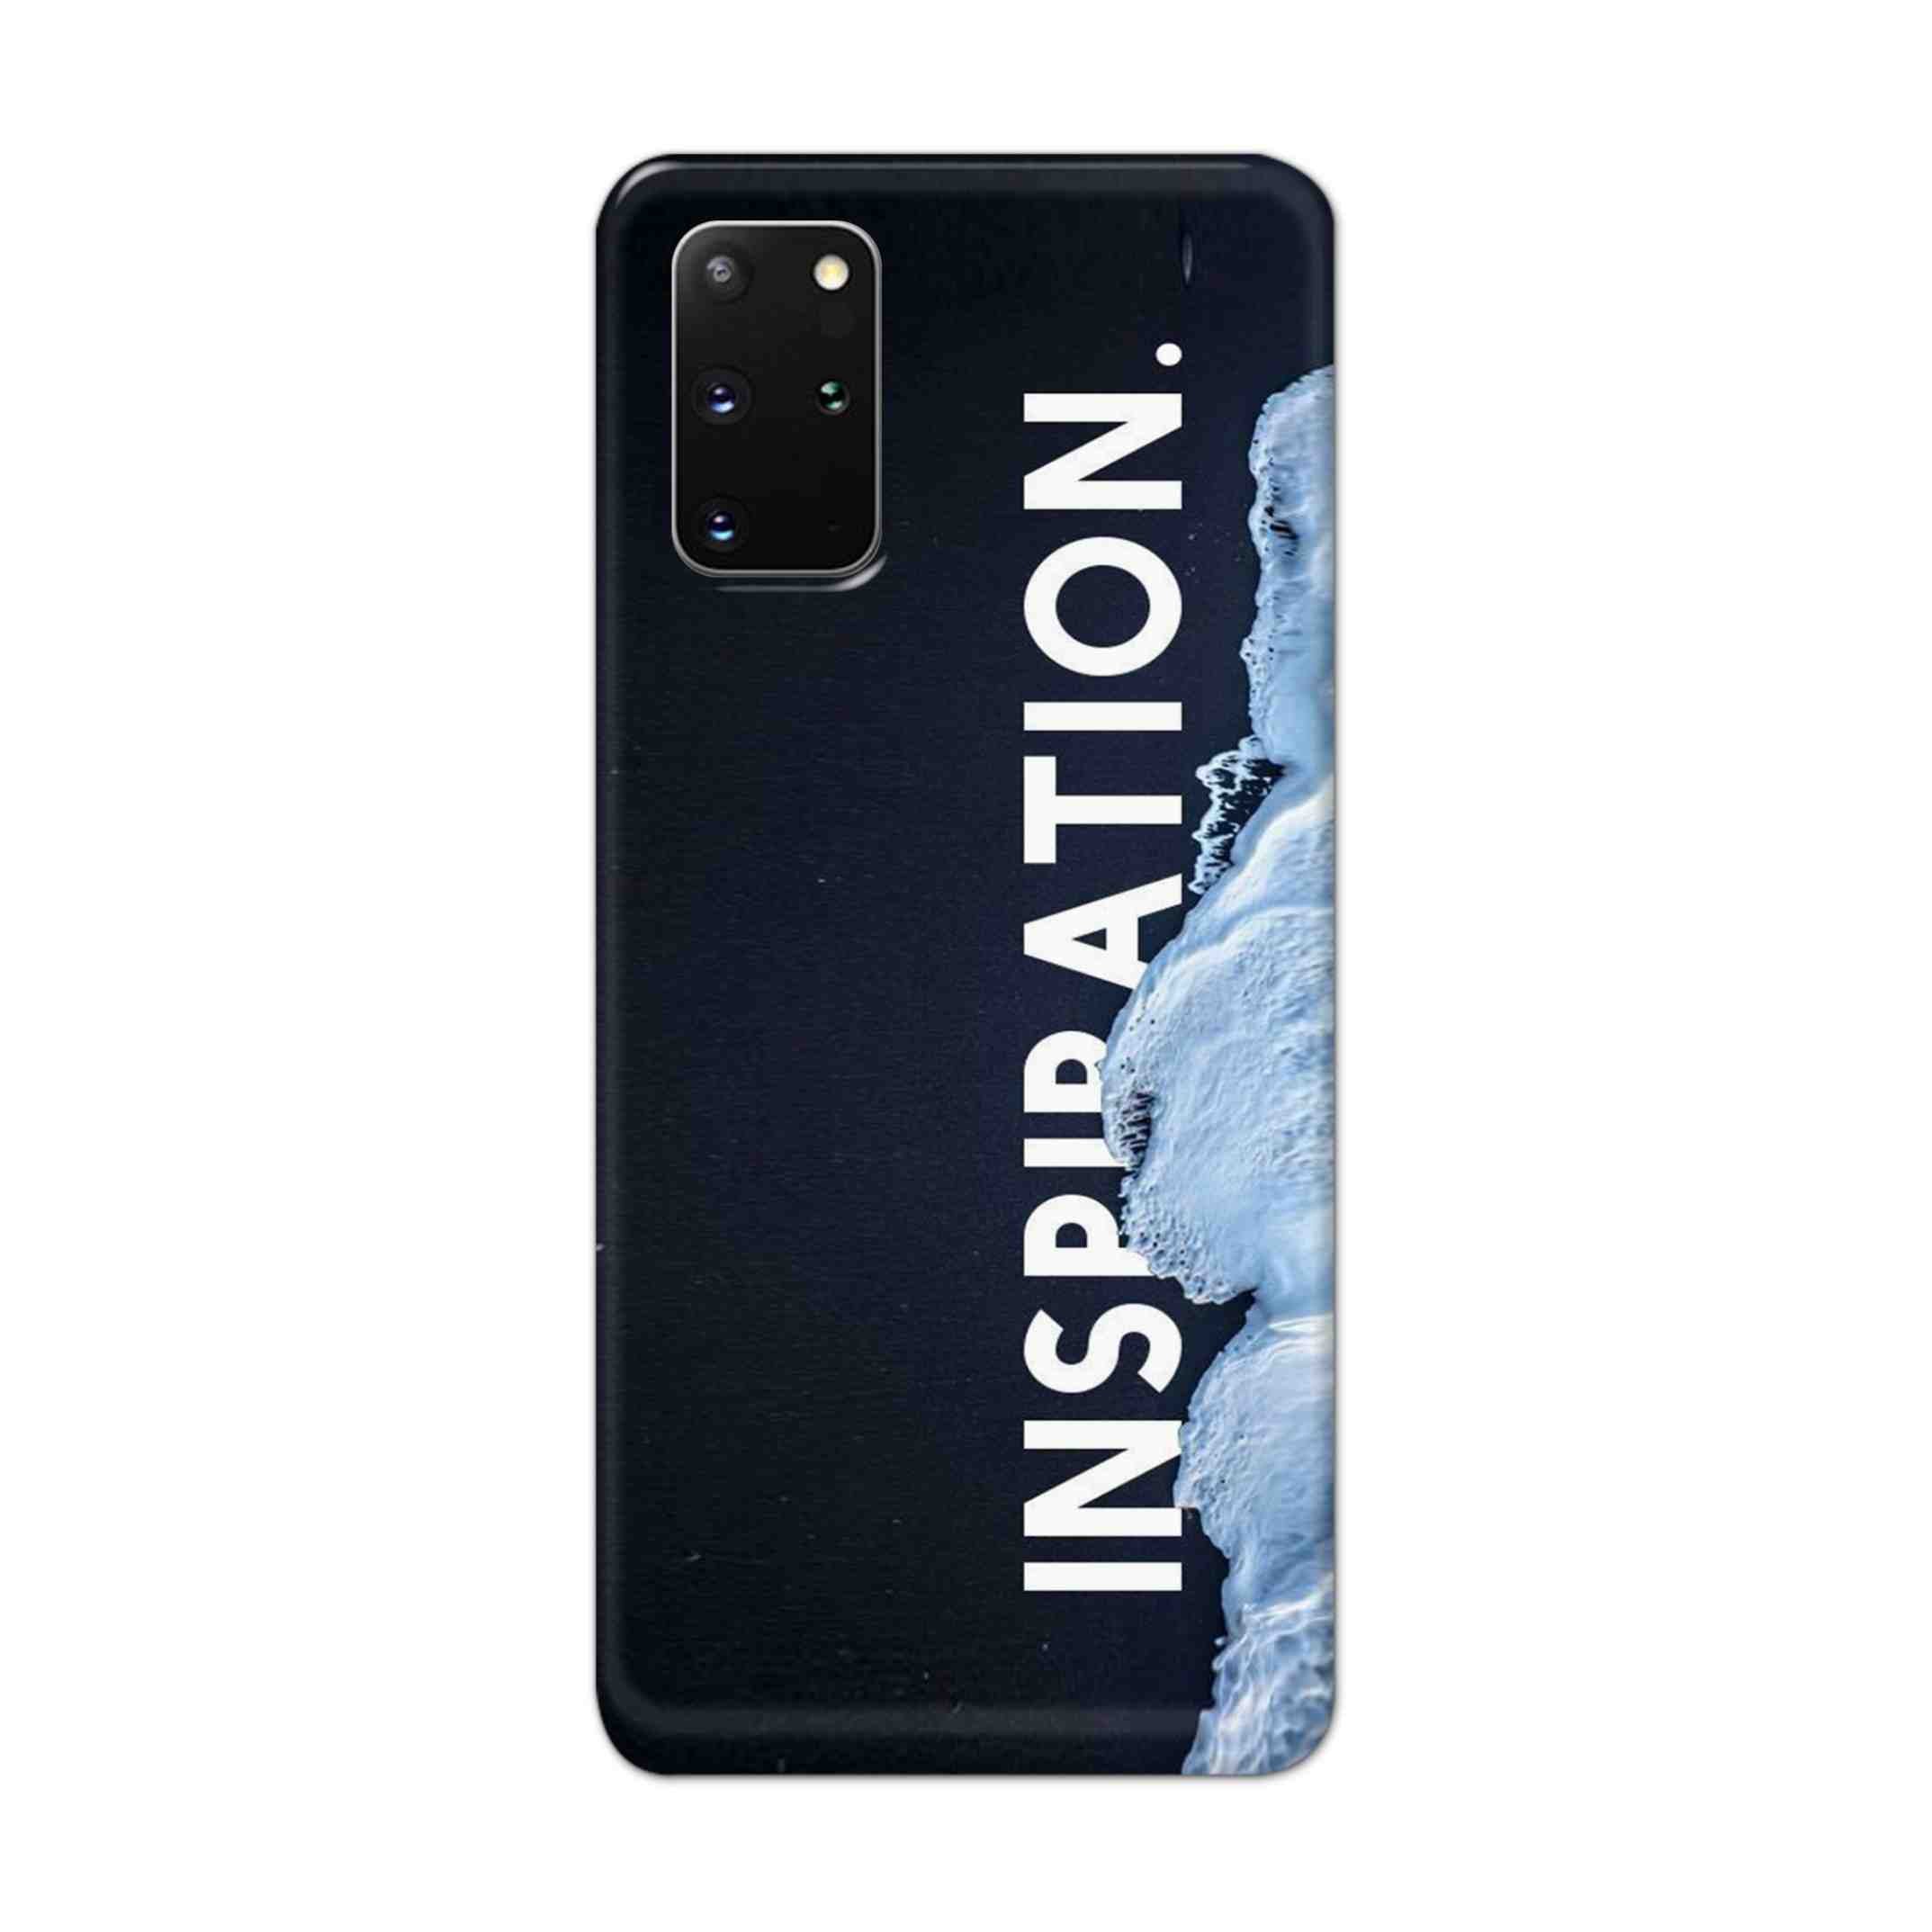 Buy Inspiration Hard Back Mobile Phone Case Cover For Samsung Galaxy S20 Plus Online